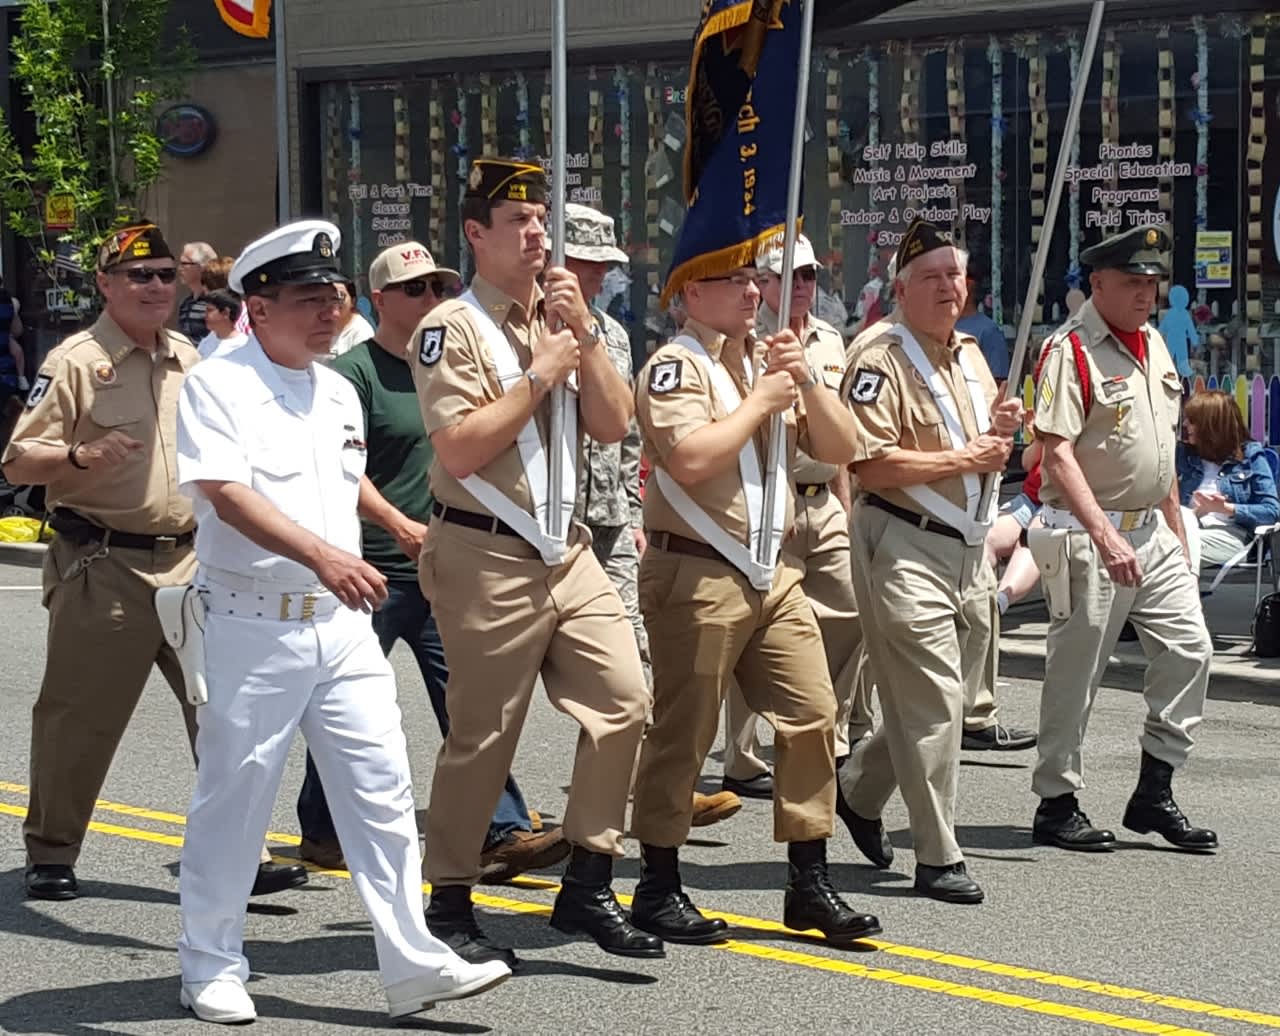 Veterans march in the Pompton Lakes Memorial Day Parade in 2015.